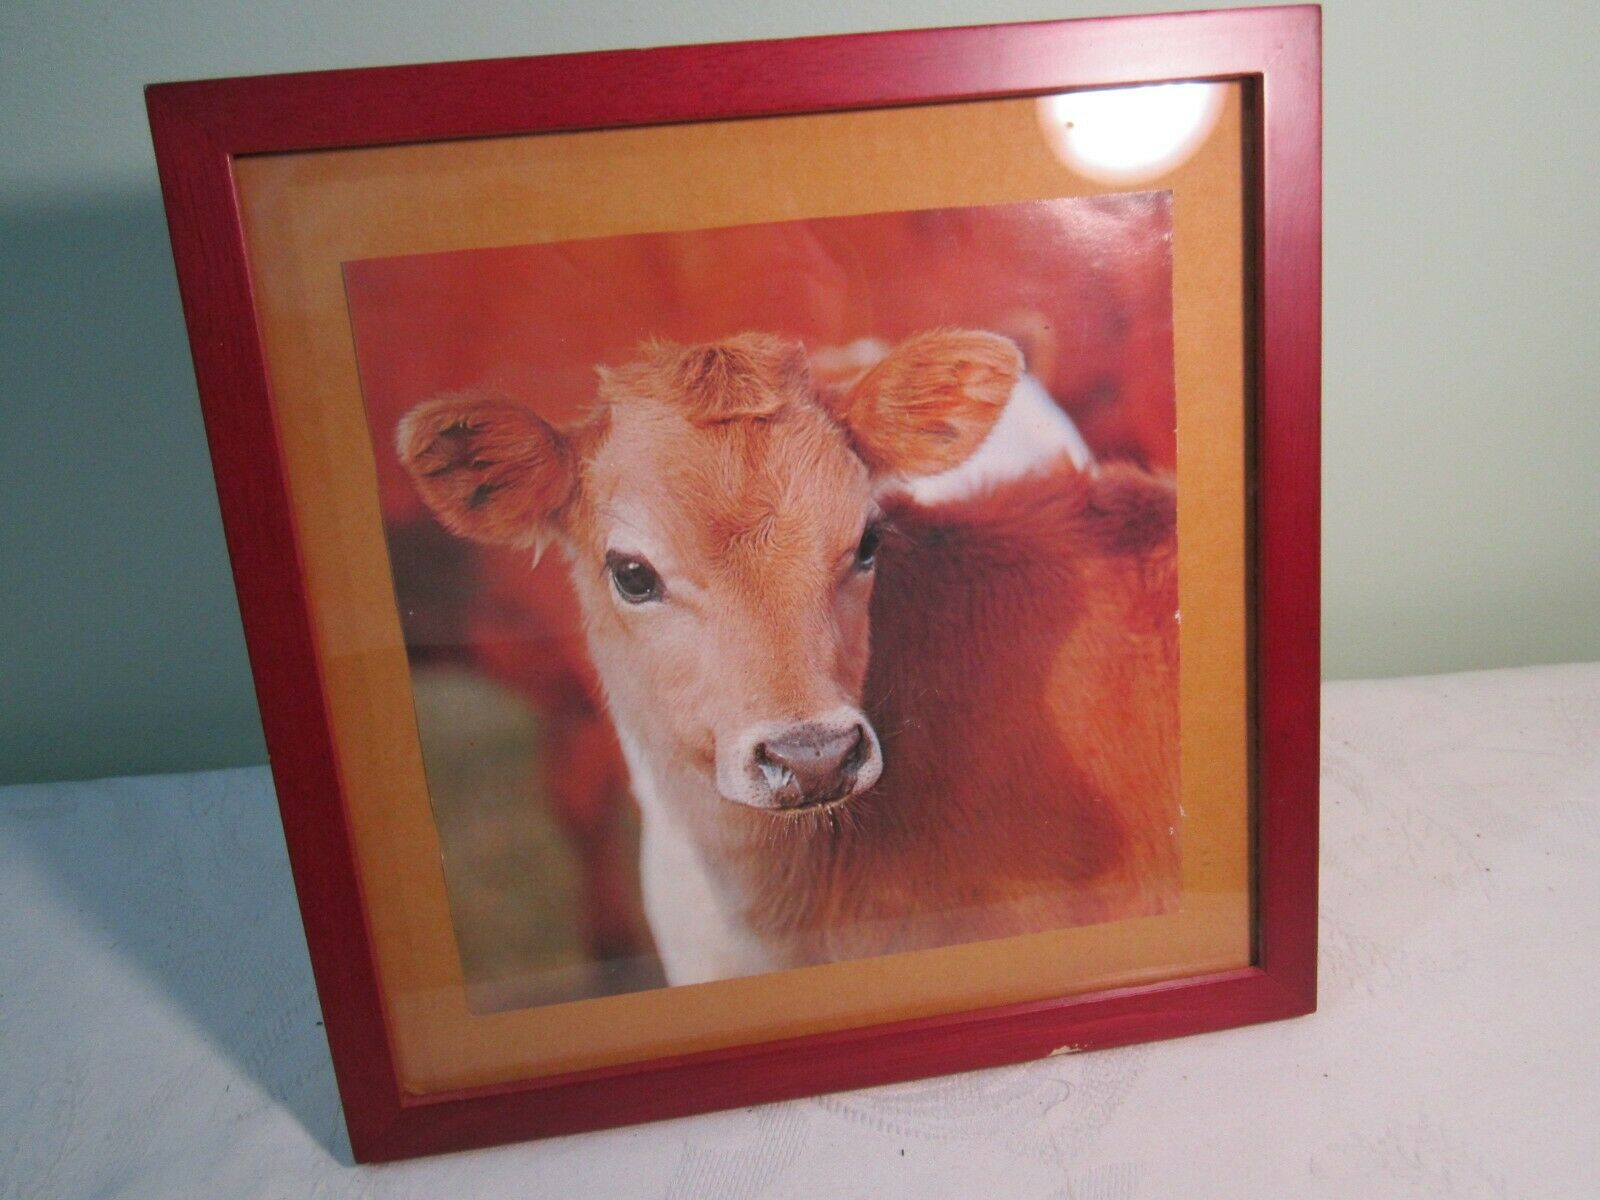 Baby Cow Calf Framed Color Farm Animal Photo Picture Print - Orange Cowhide Hair